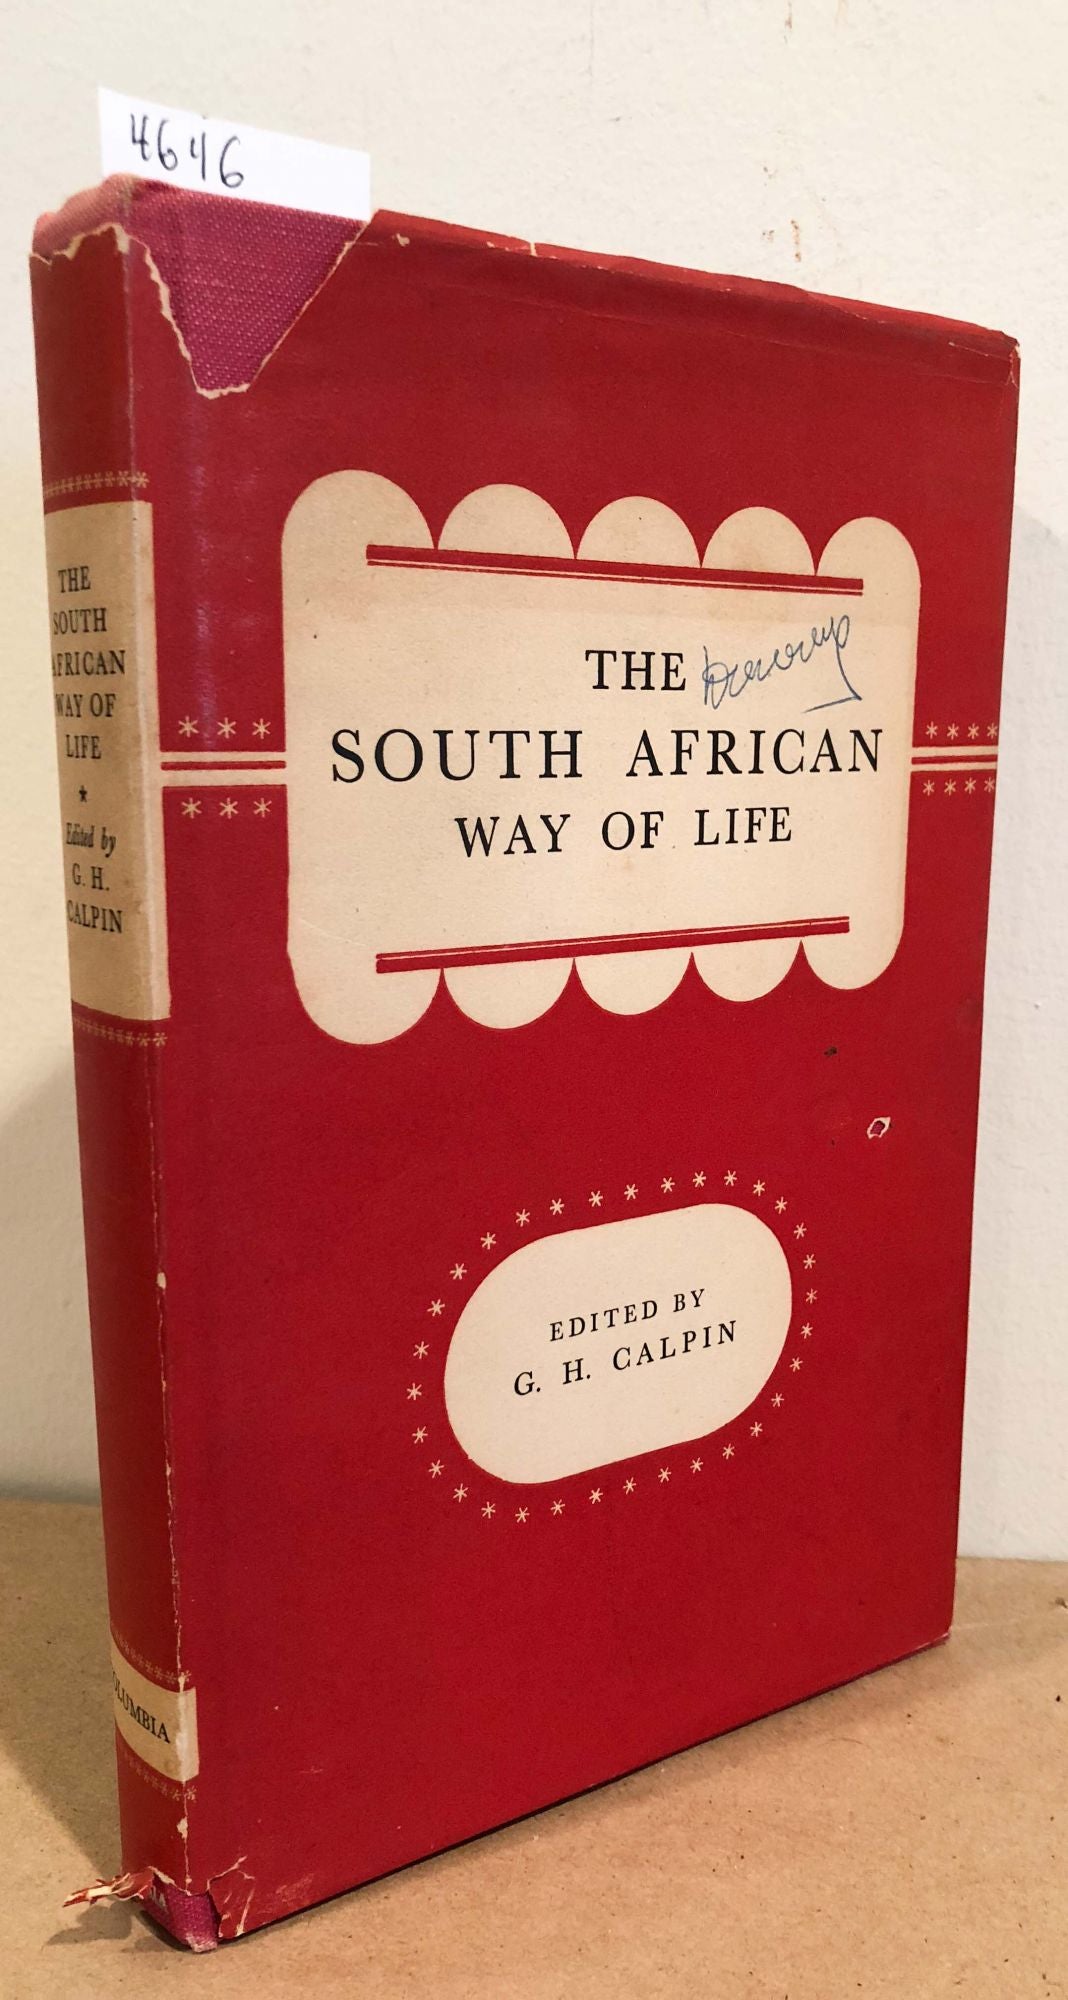 The South African Way of Life, G. H. Calpin